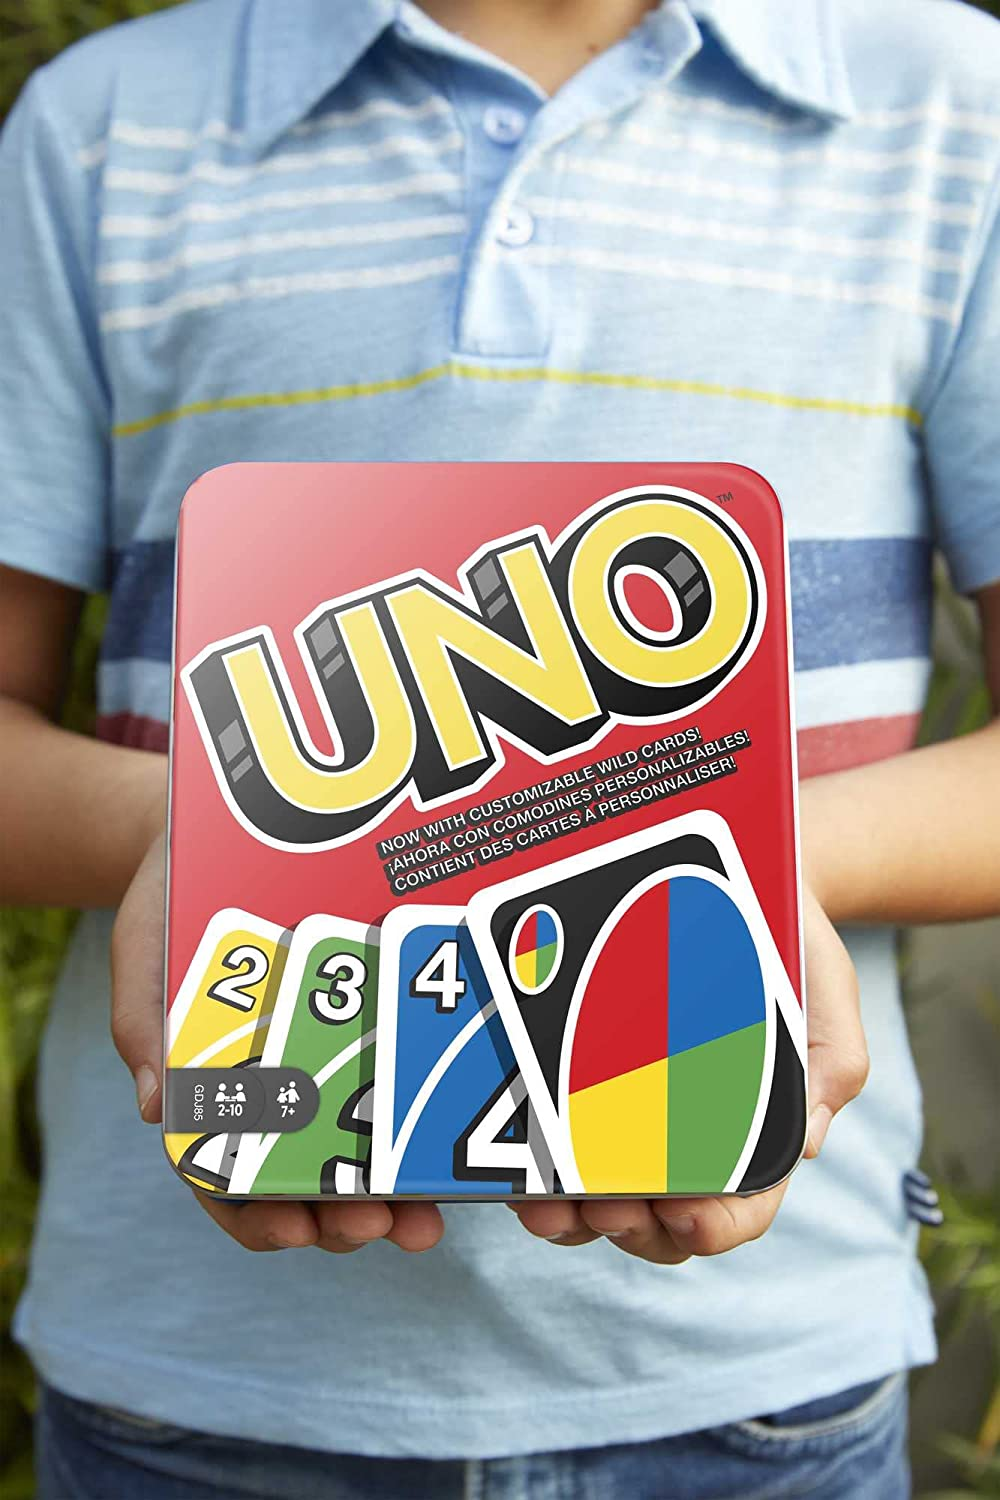 UNO Family Card Game, with 112 Cards in a Sturdy Storage Tin, Travel-Friendly, Makes a Great Gift for 7 Year Olds and Up​ [Amazon Exclusive]